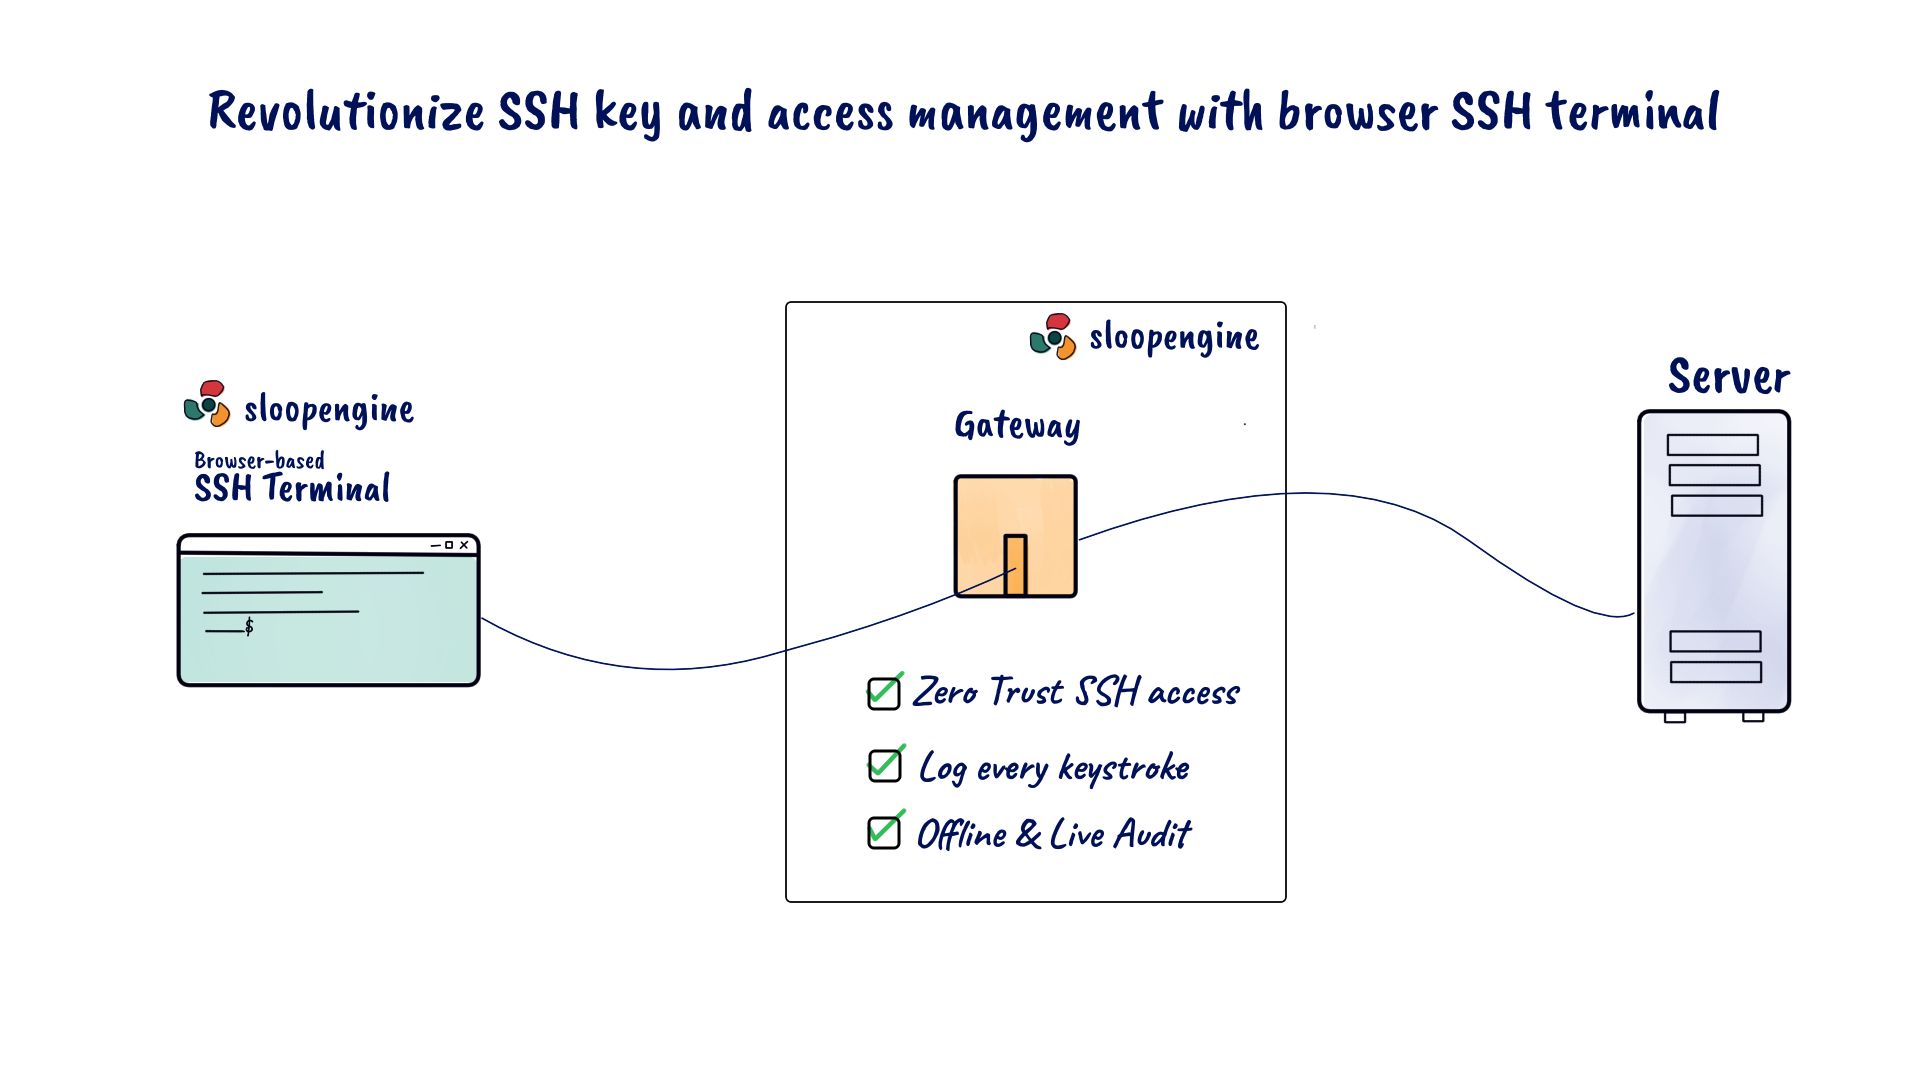 The illustration highlights the significance of a browser-based SSH terminal.